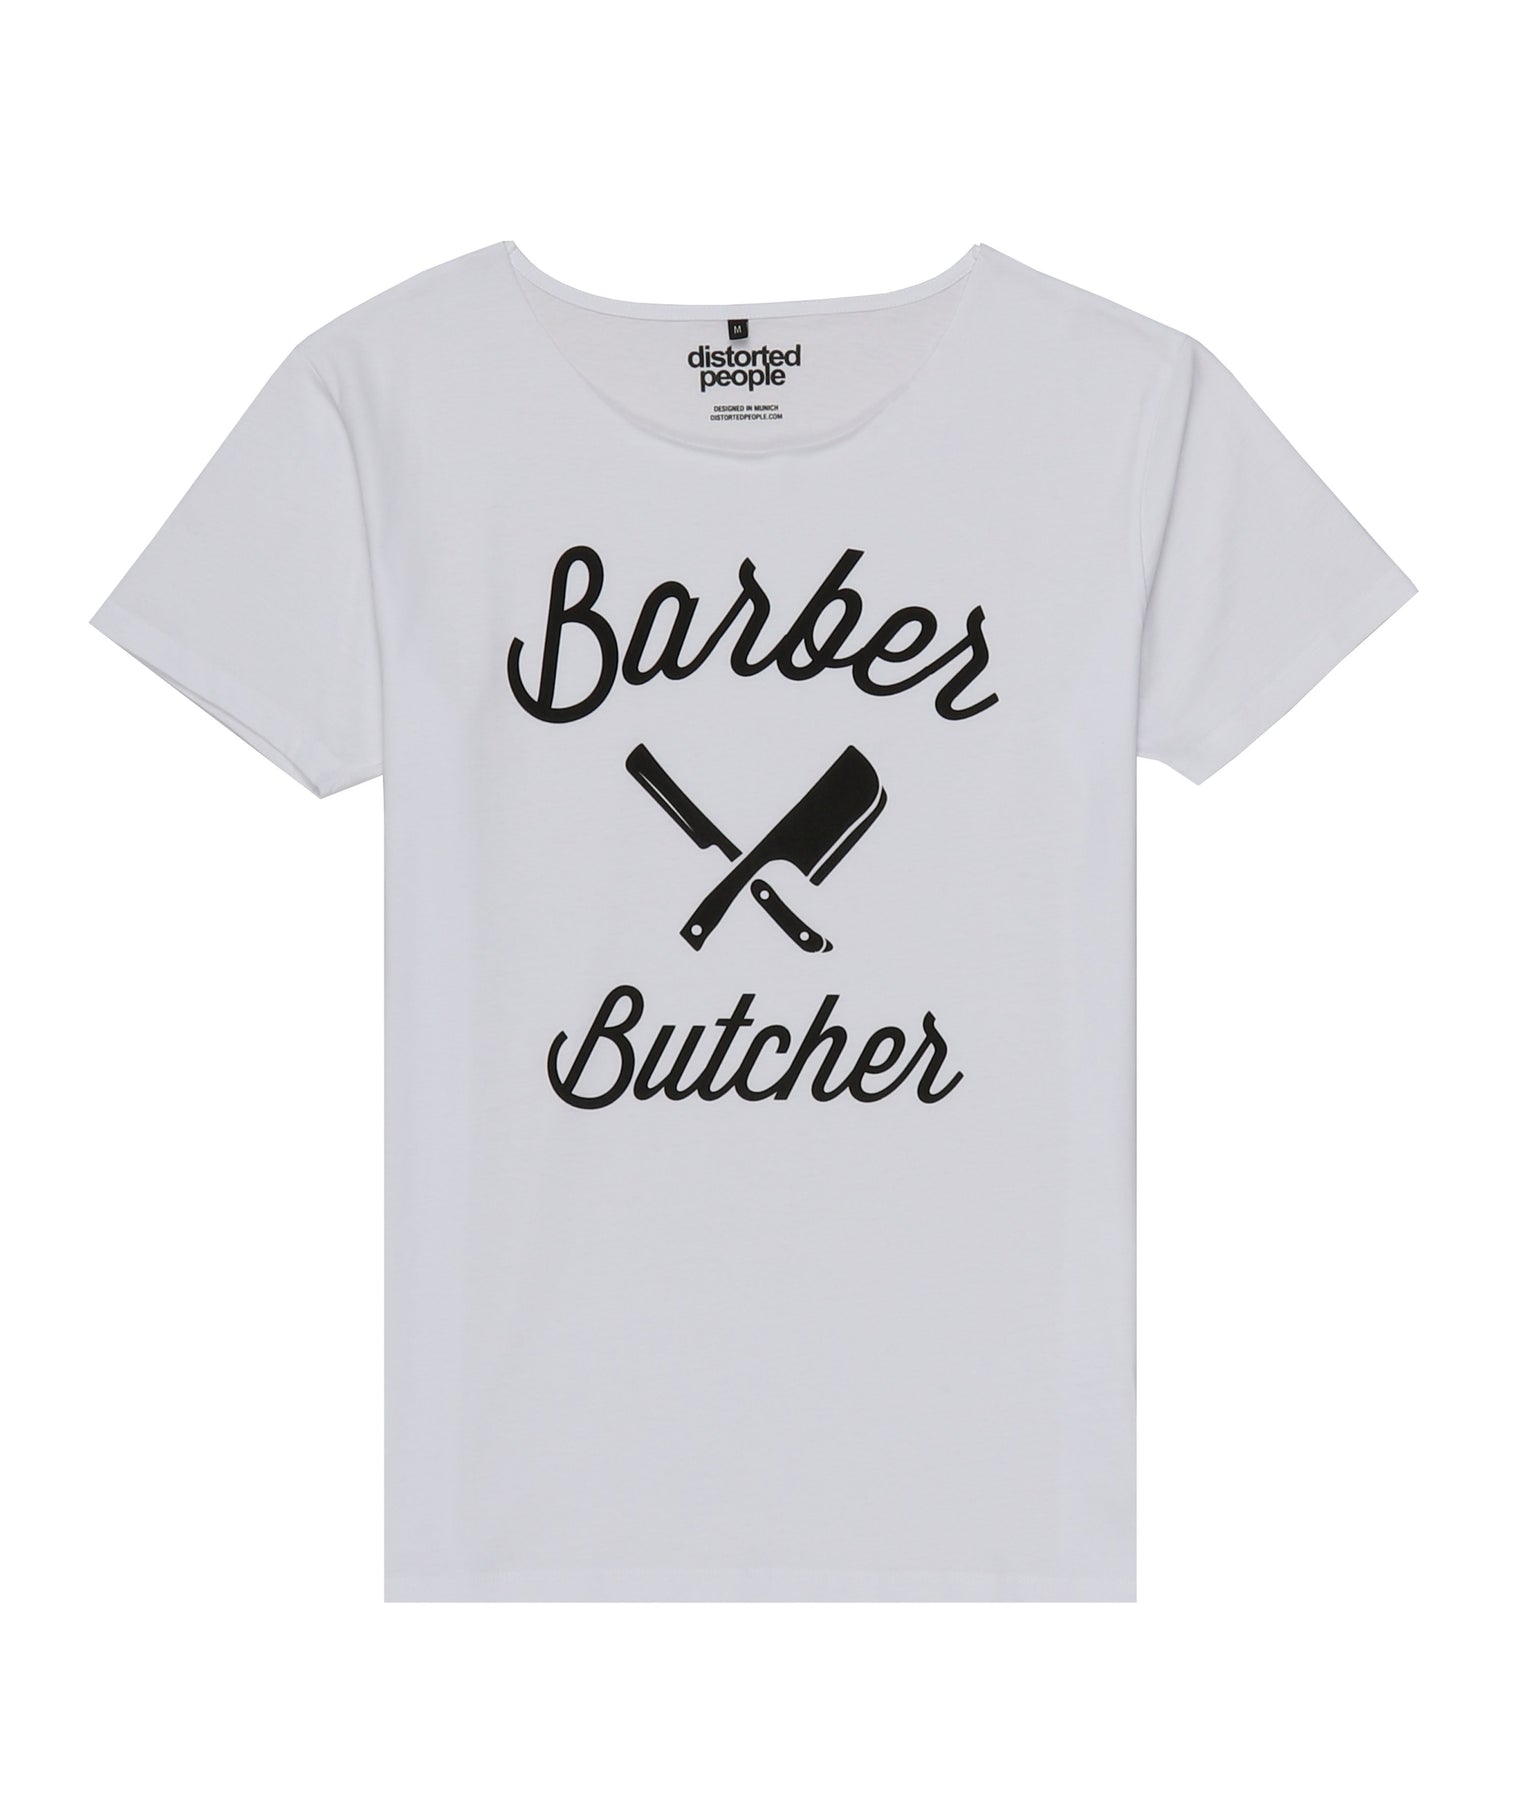 Black Barber USA Distorted Butcher | Neck Distorted People Blades People T-Shirt – Cut 